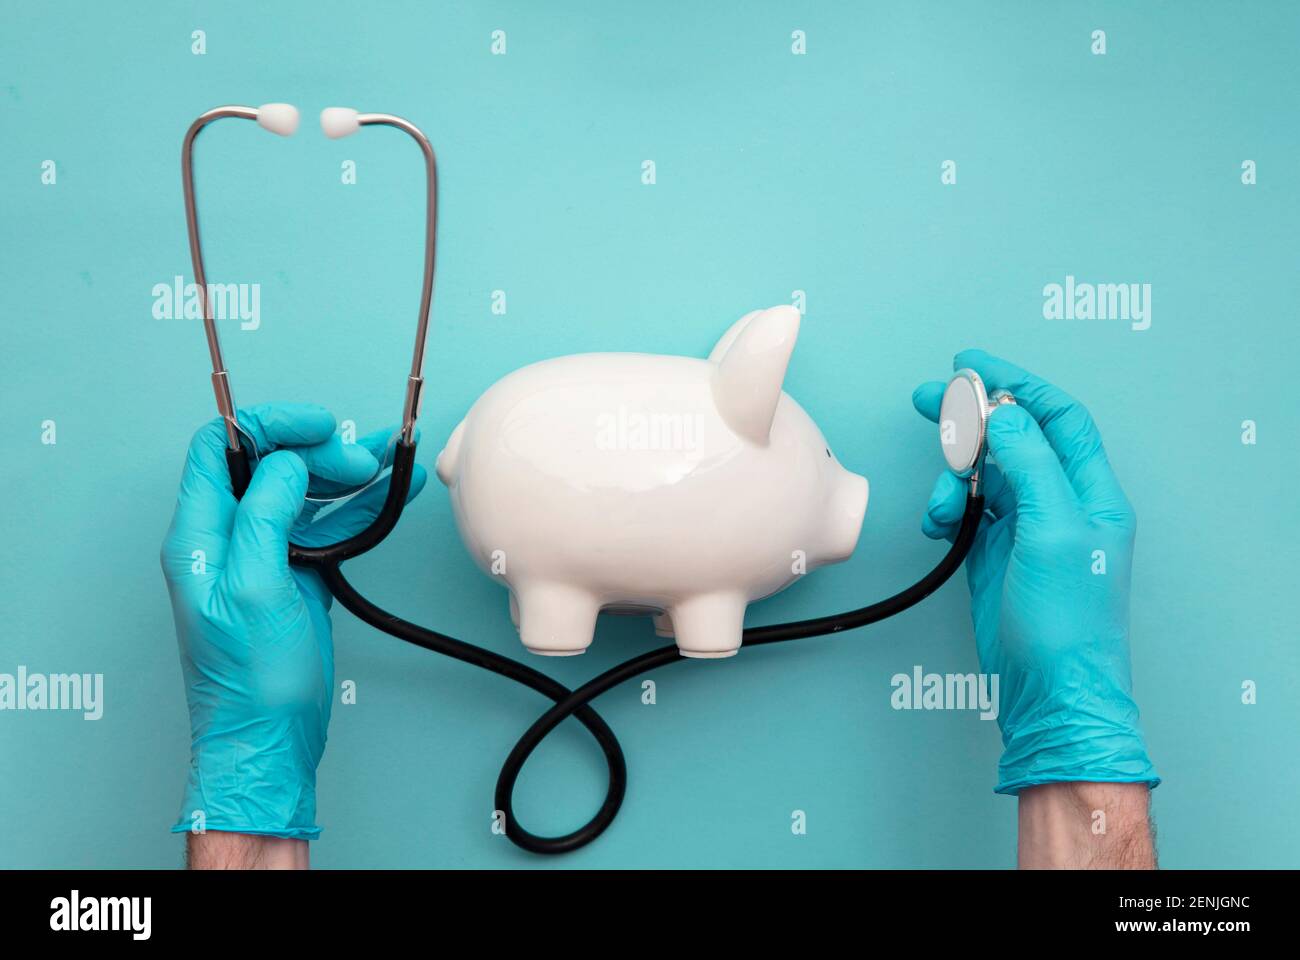 Health care cost. Doctor in surgical gloves holding a white piggy bank and stethoscope Stock Photo